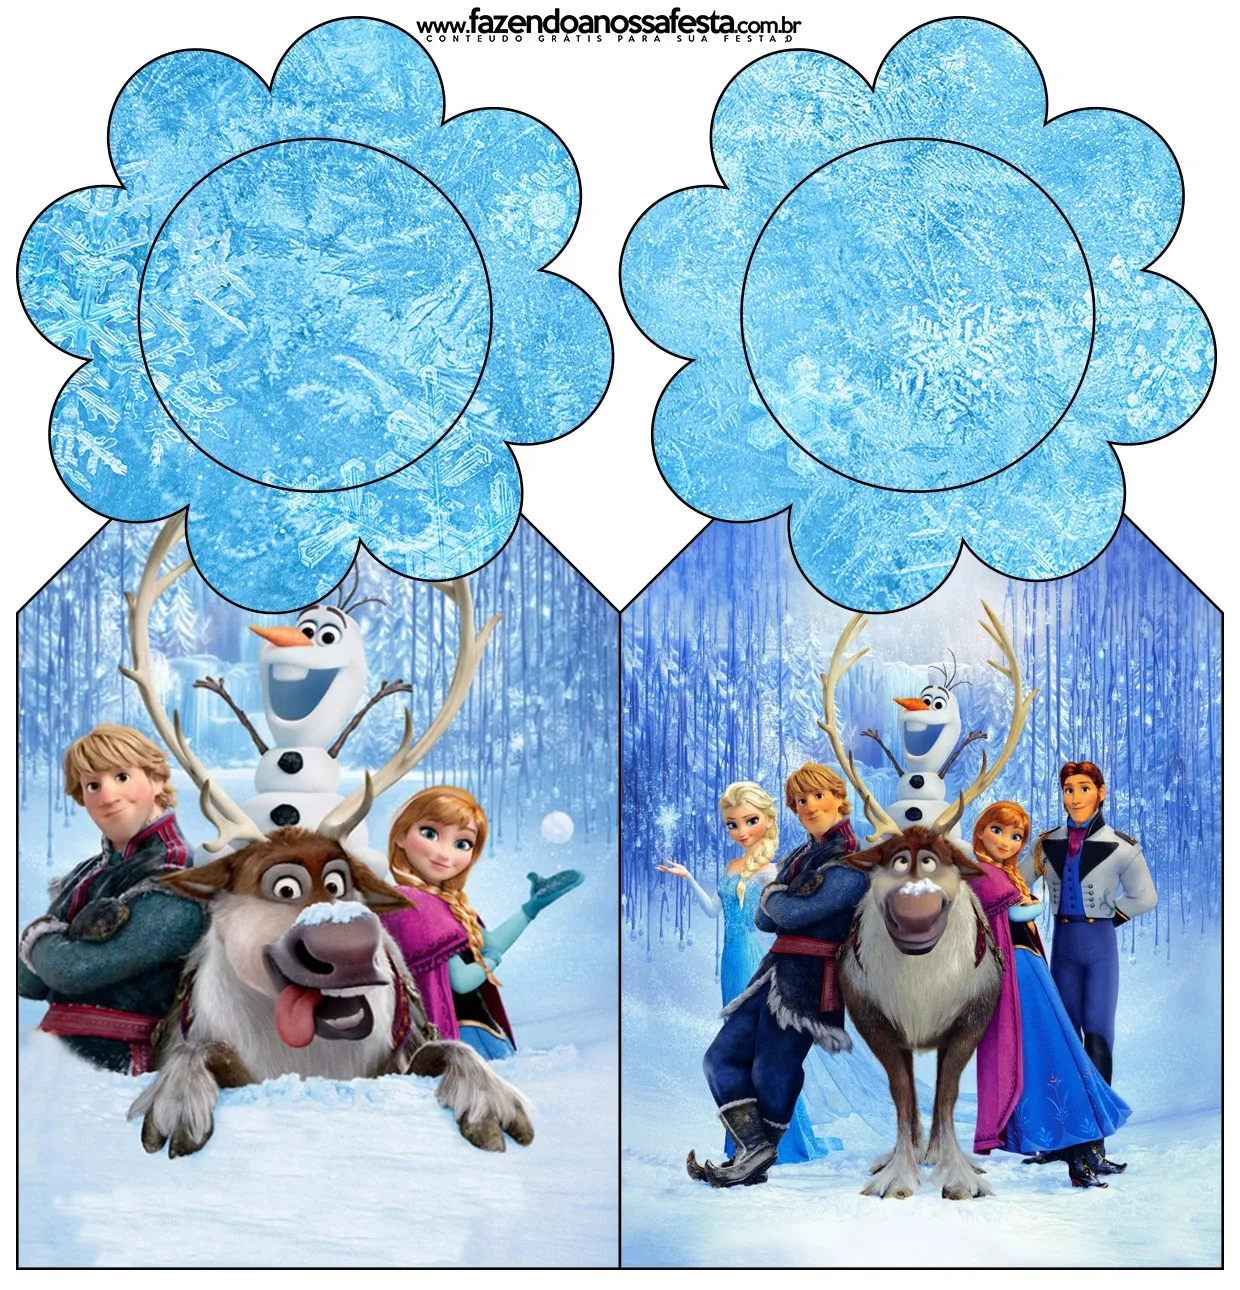 Frozen: Free Printable Coloring Book - Oh My Fiesta! in english